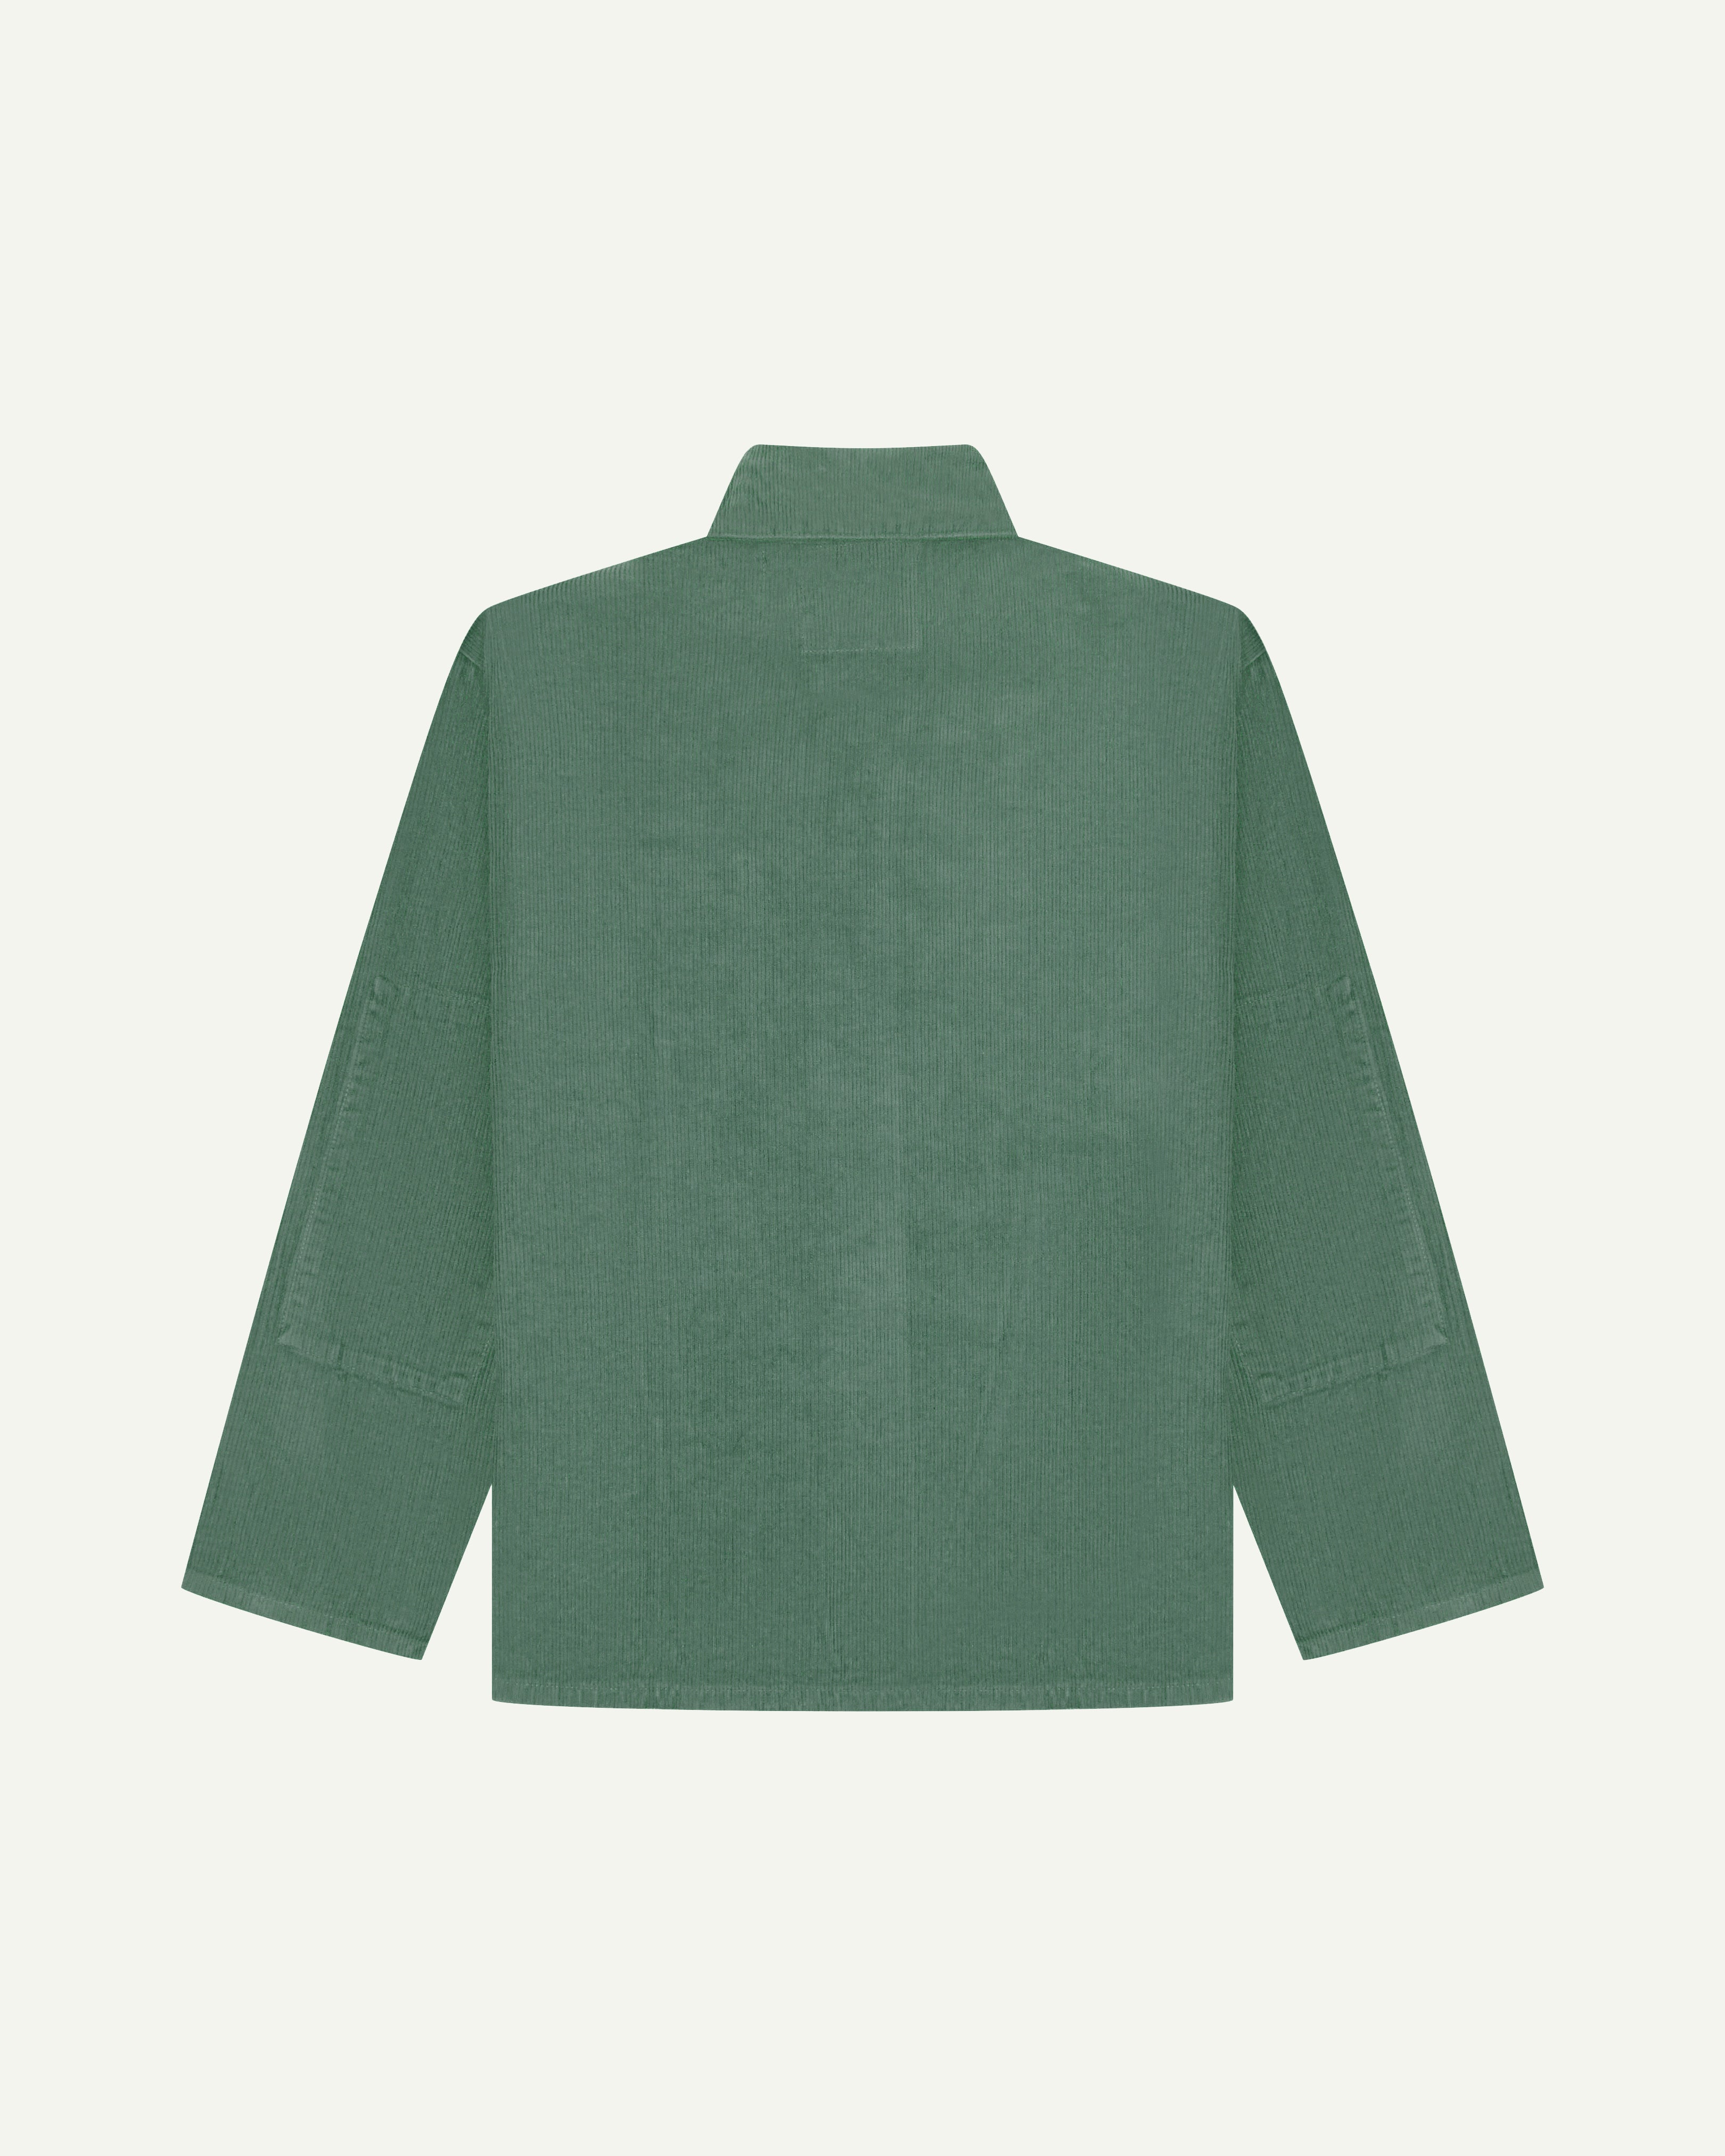 Back view of light green, buttoned corduroy overshirt for men from Uskees. 